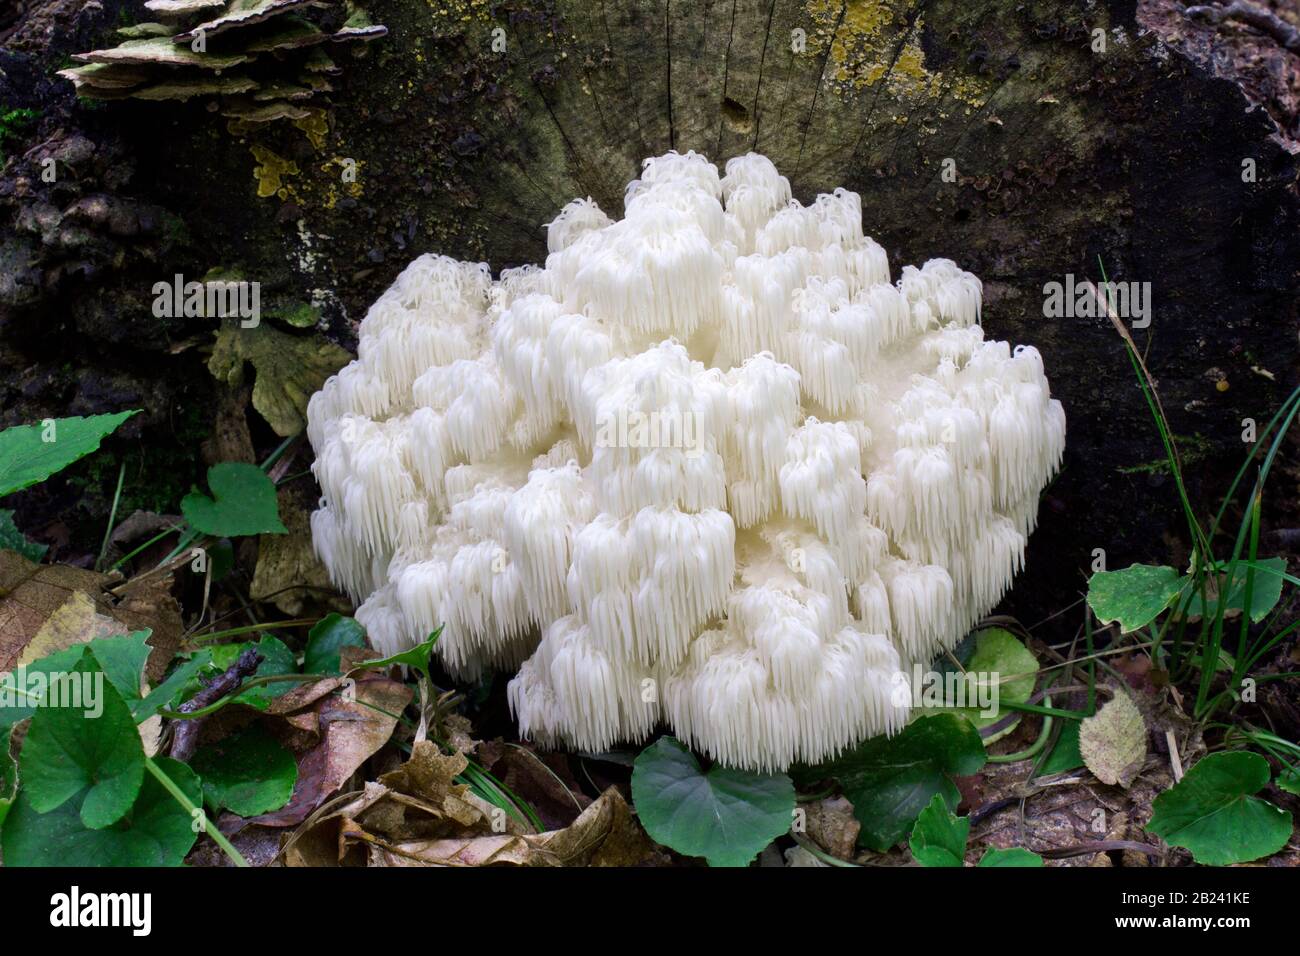 Coral Hedgehog Fungus, Hericium coralloides, growing ion a decaying log in Wayne County, Pennsylvania Stock Photo